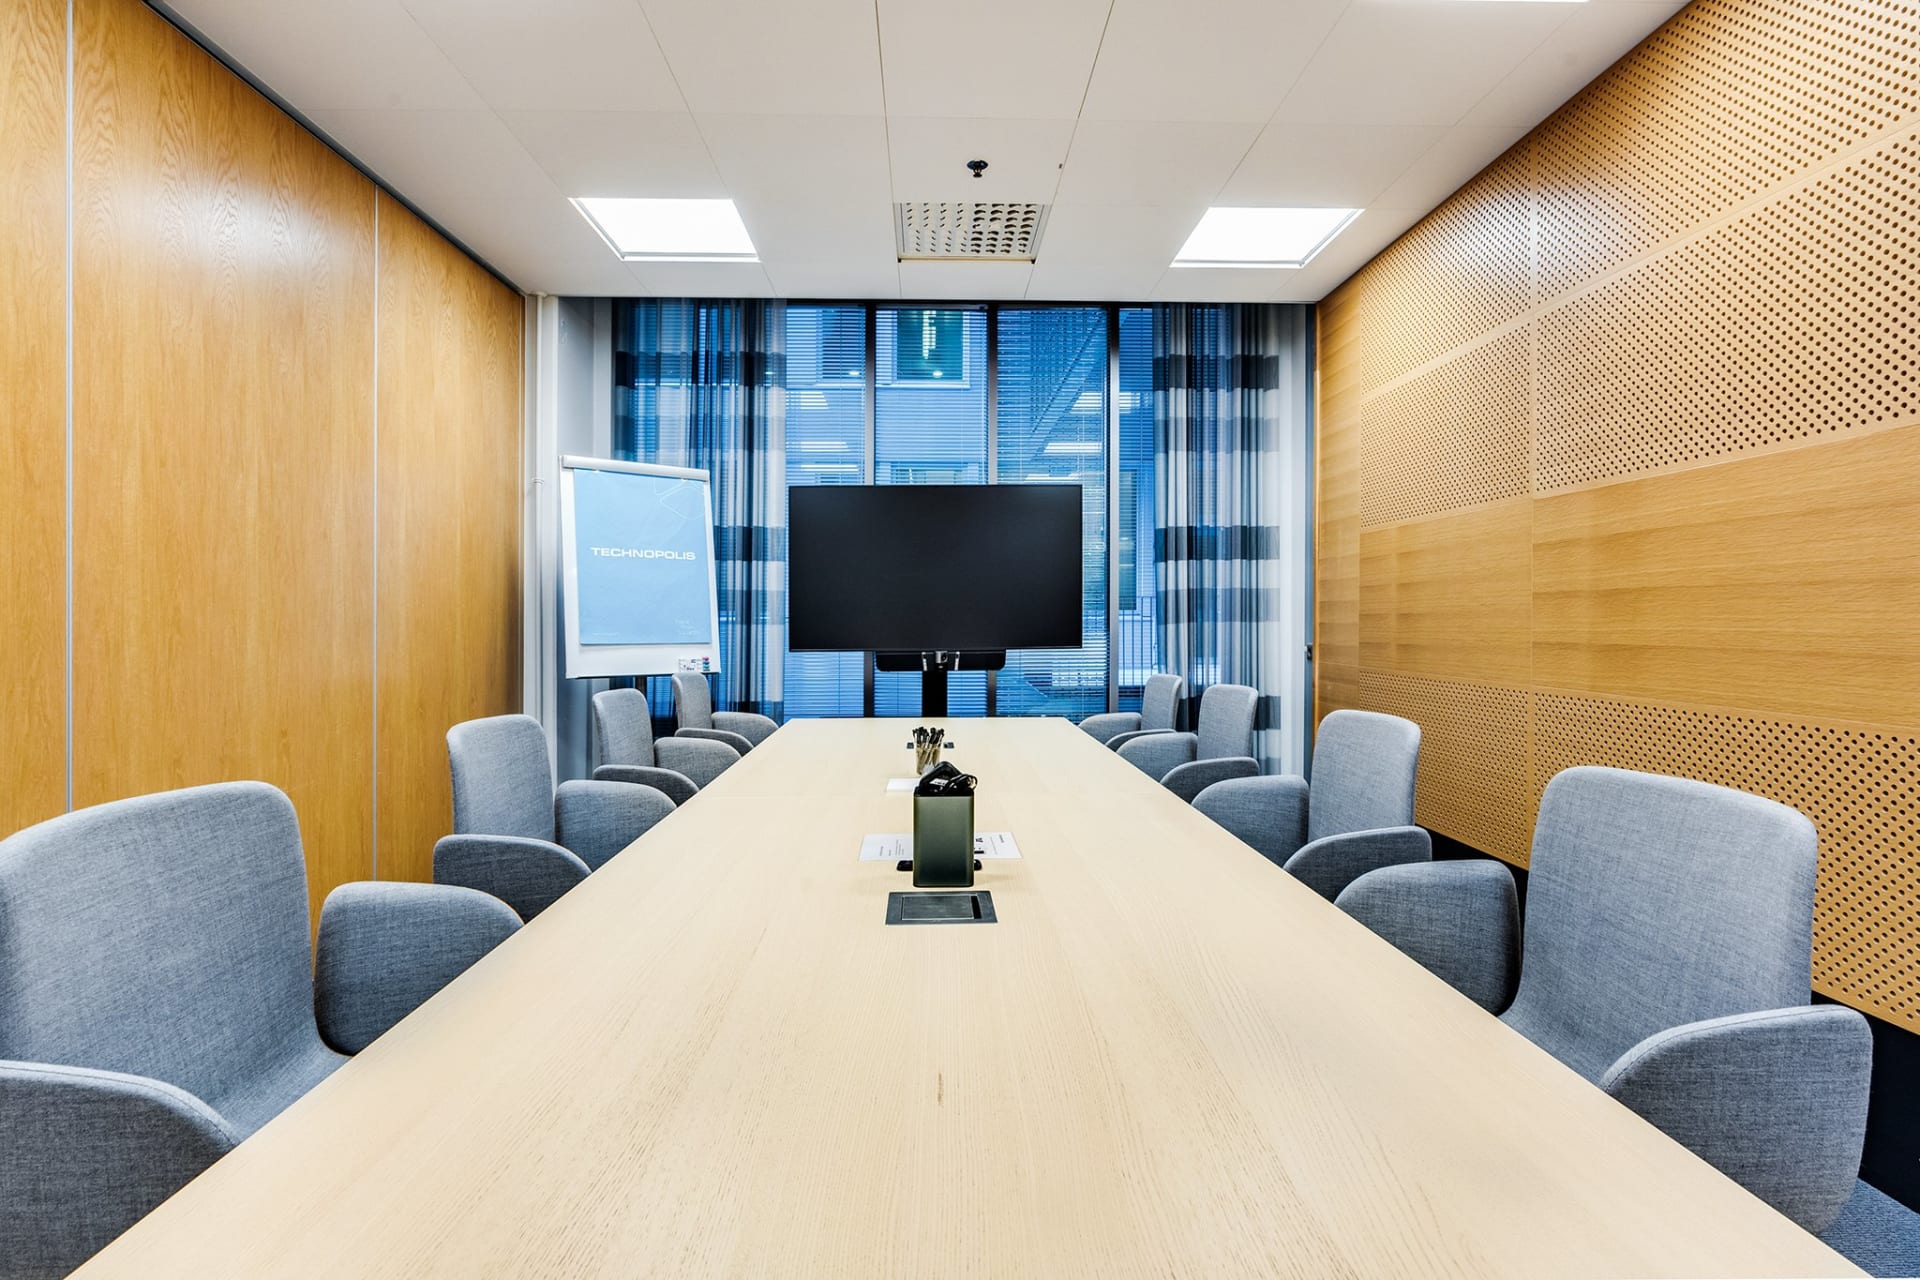 Interior of the meeting room Nottbeck.